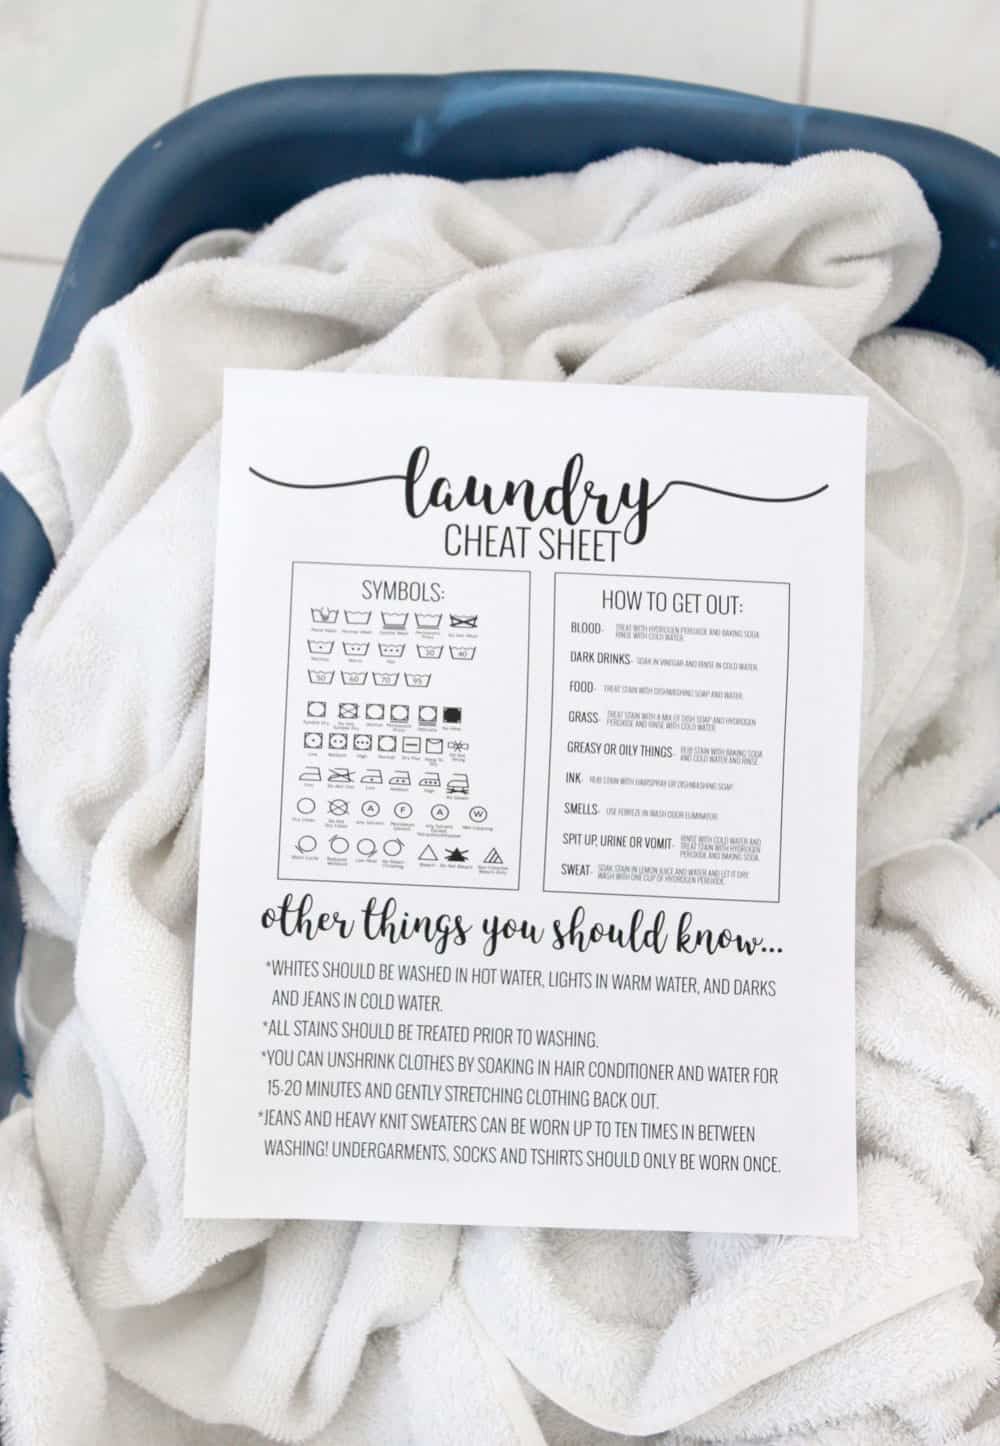 a laundry cheat sheet on top of a basket full of towels